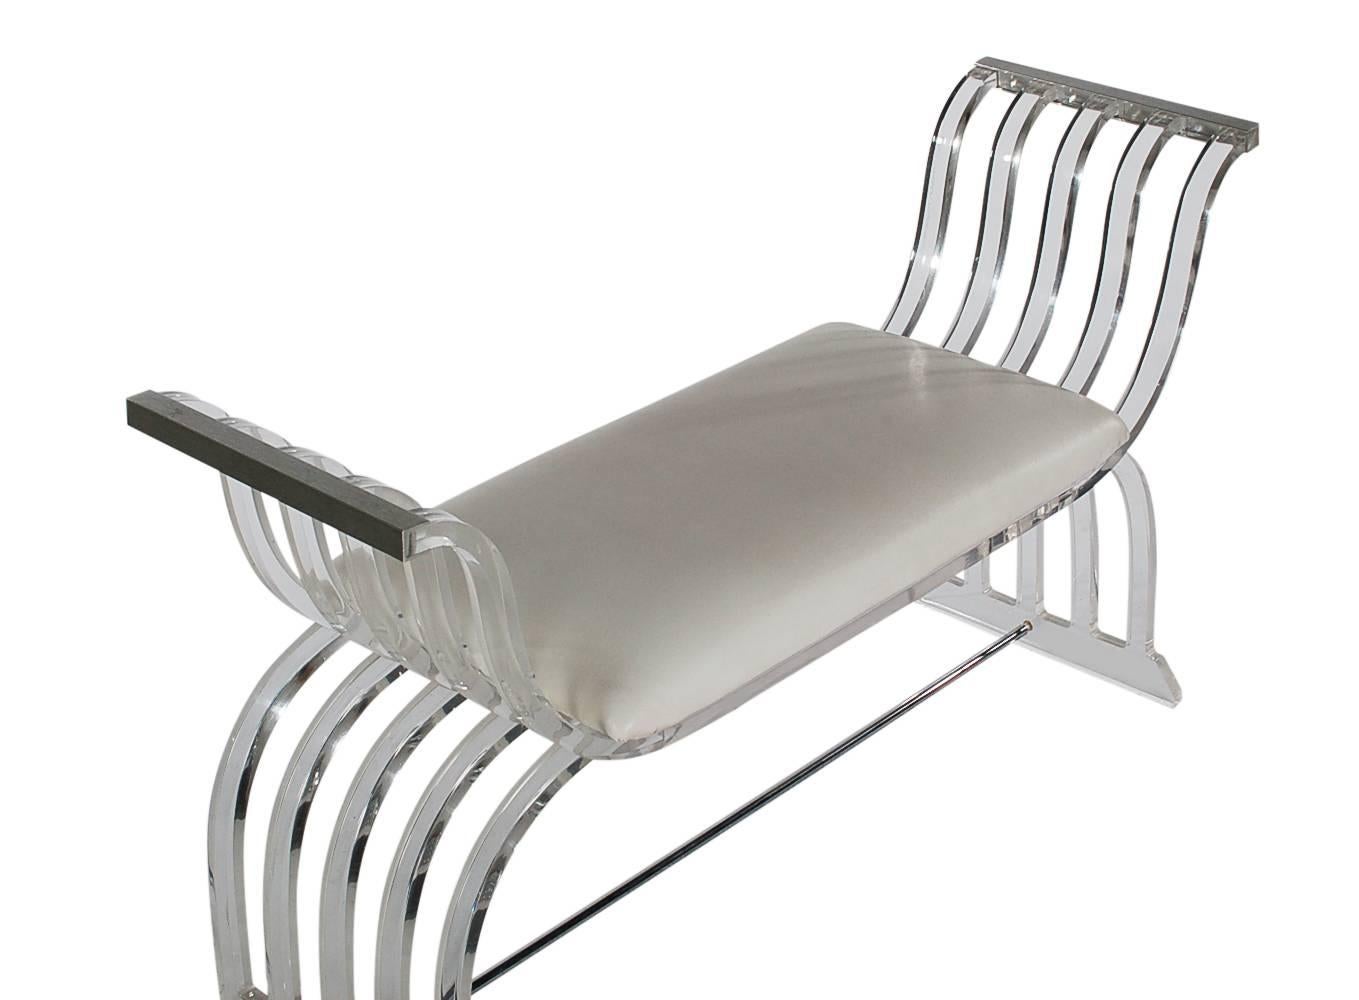 American Art Deco Curved Lucite Settee or Bench after Charles Hollis Jones